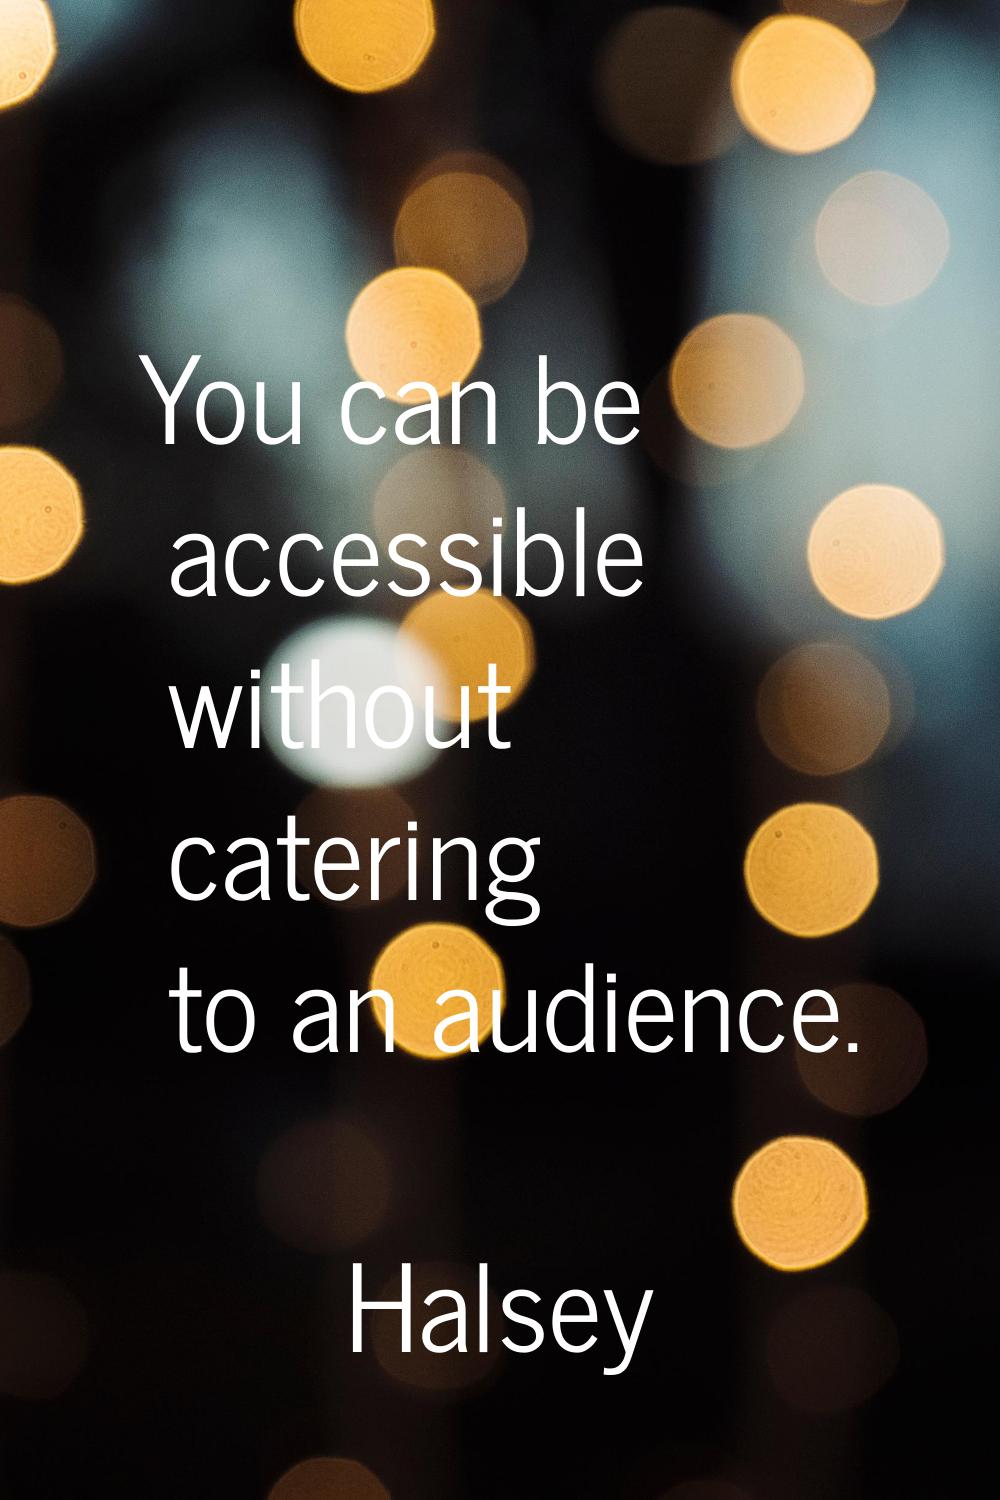 You can be accessible without catering to an audience.